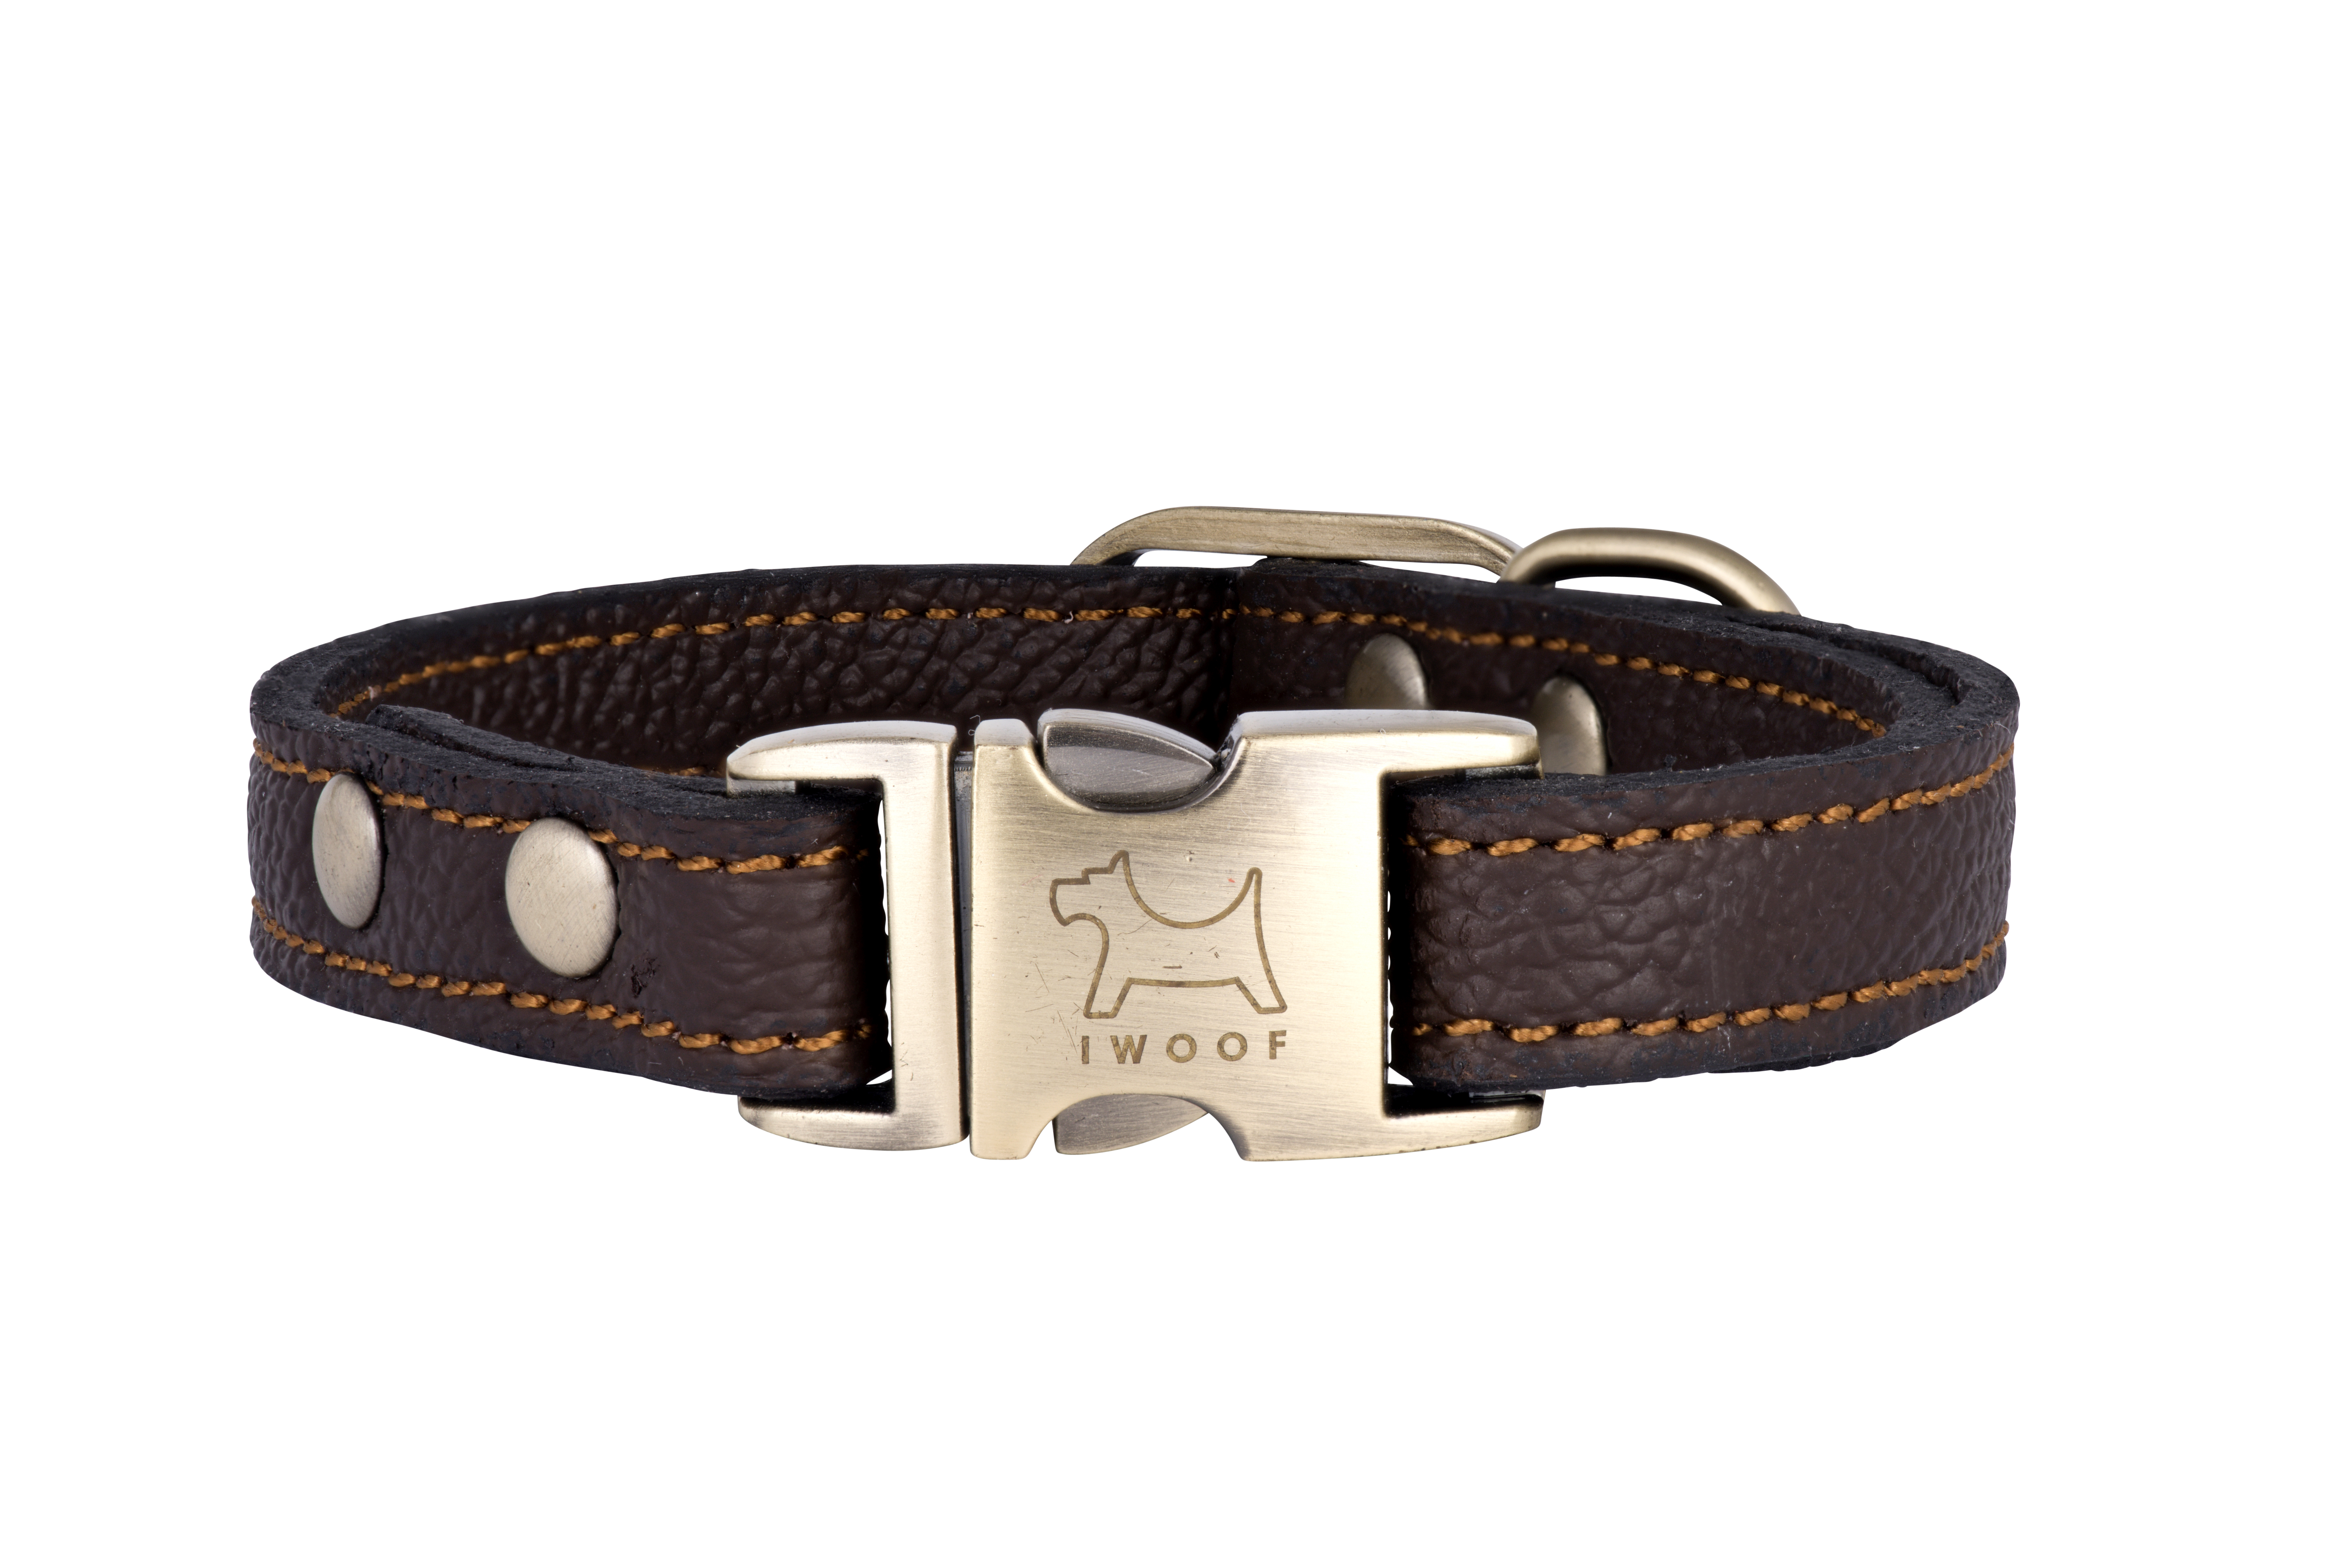 Royal Brown leather designer dog collar and dog lead by IWOOf